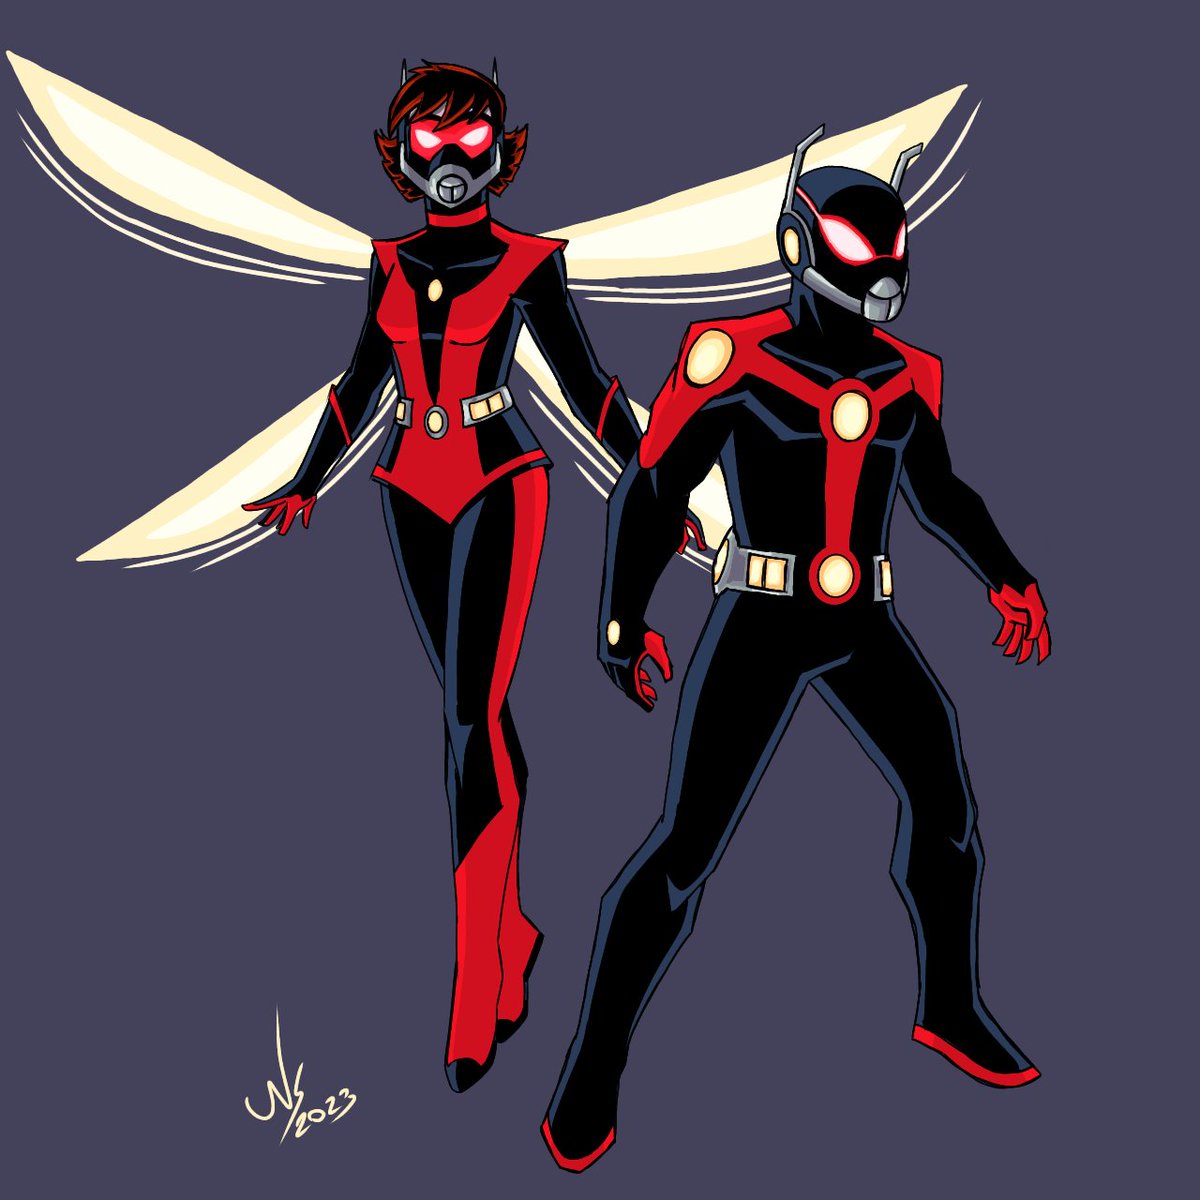 hank pym and janet van dyne/Ant-man and The Wasp.
#Marvel #MarvelComics #MCU #AntManAndTheWasp #art #Artists #artistsontwitter